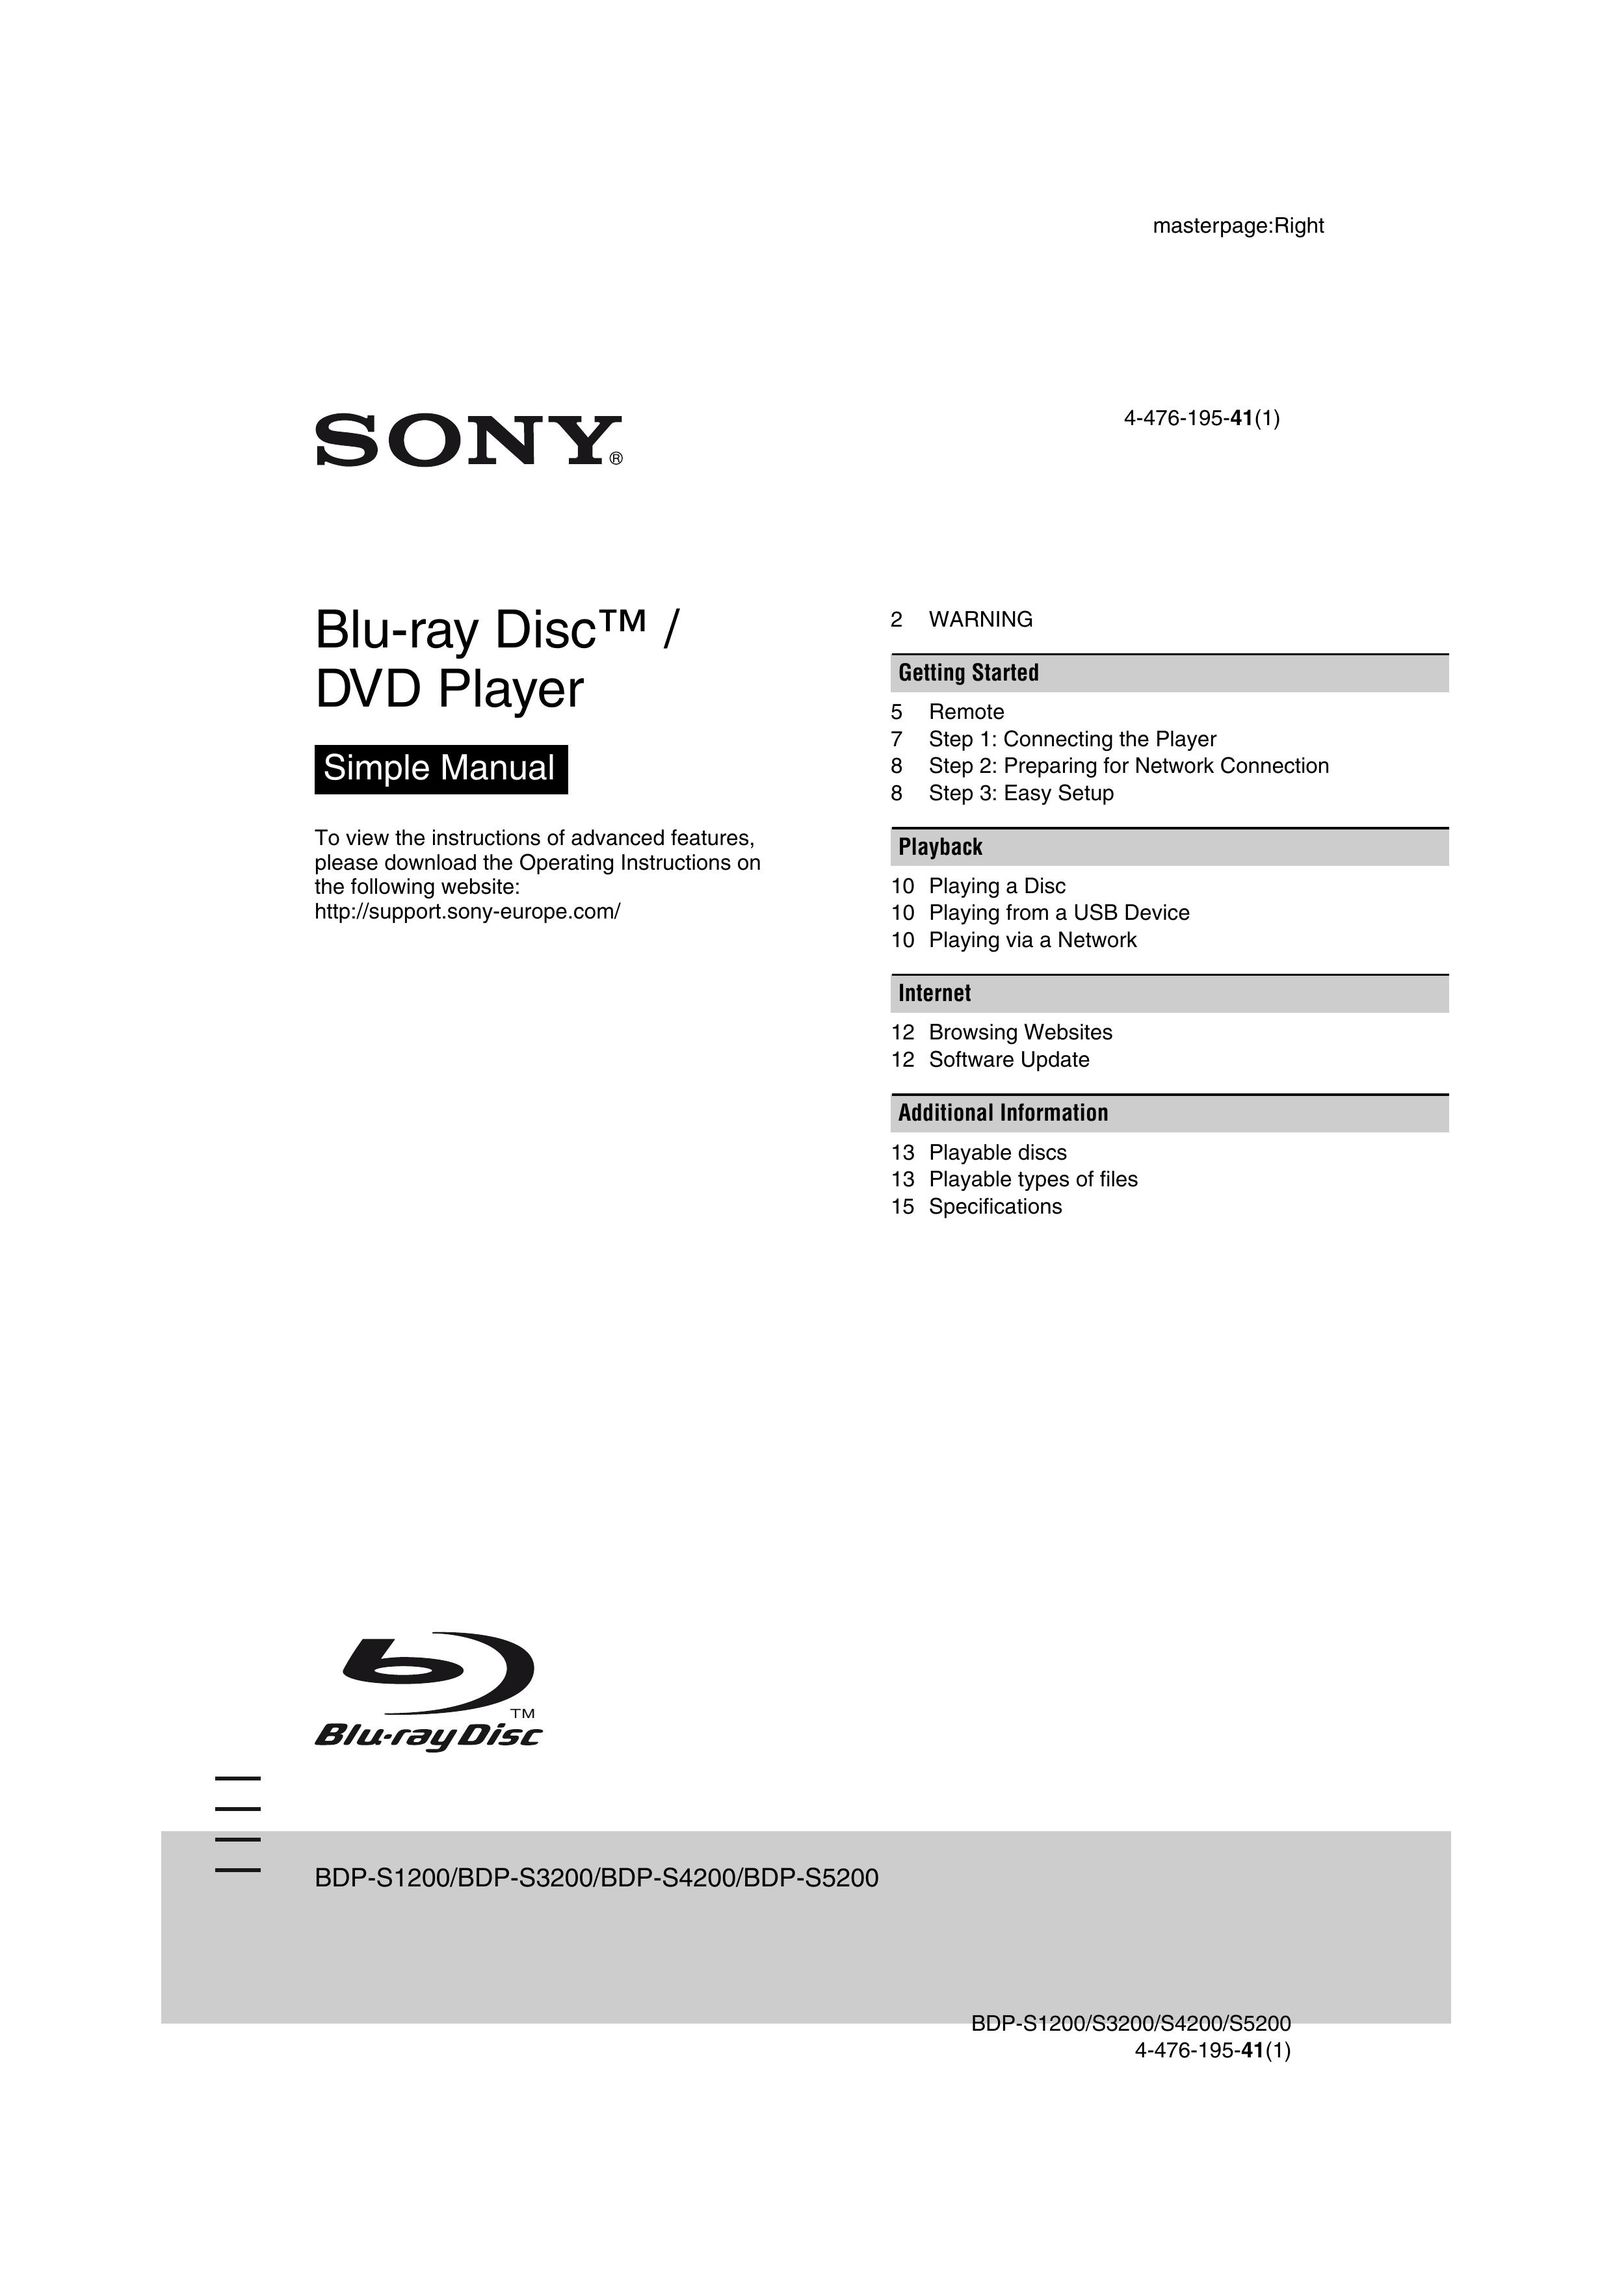 Sony BDP-S1200 Blu-ray Player User Manual